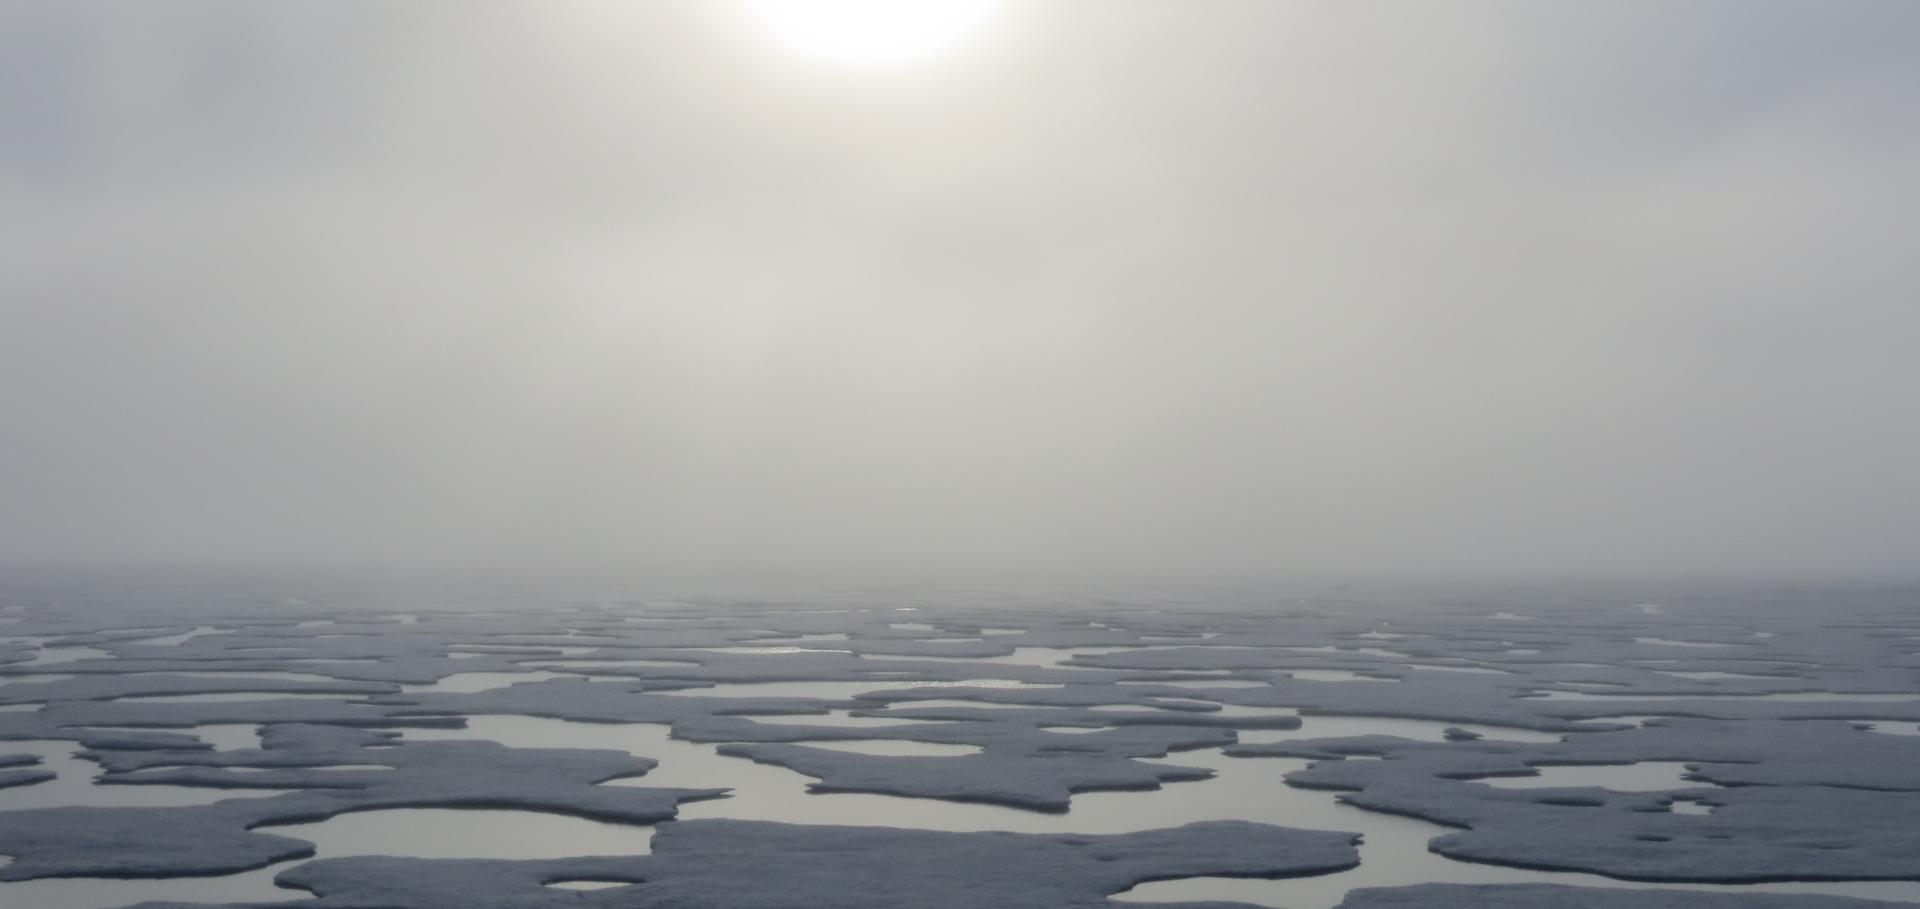 Image of melt ponds on Arctic sea ice. The sun is hazily visible above it.